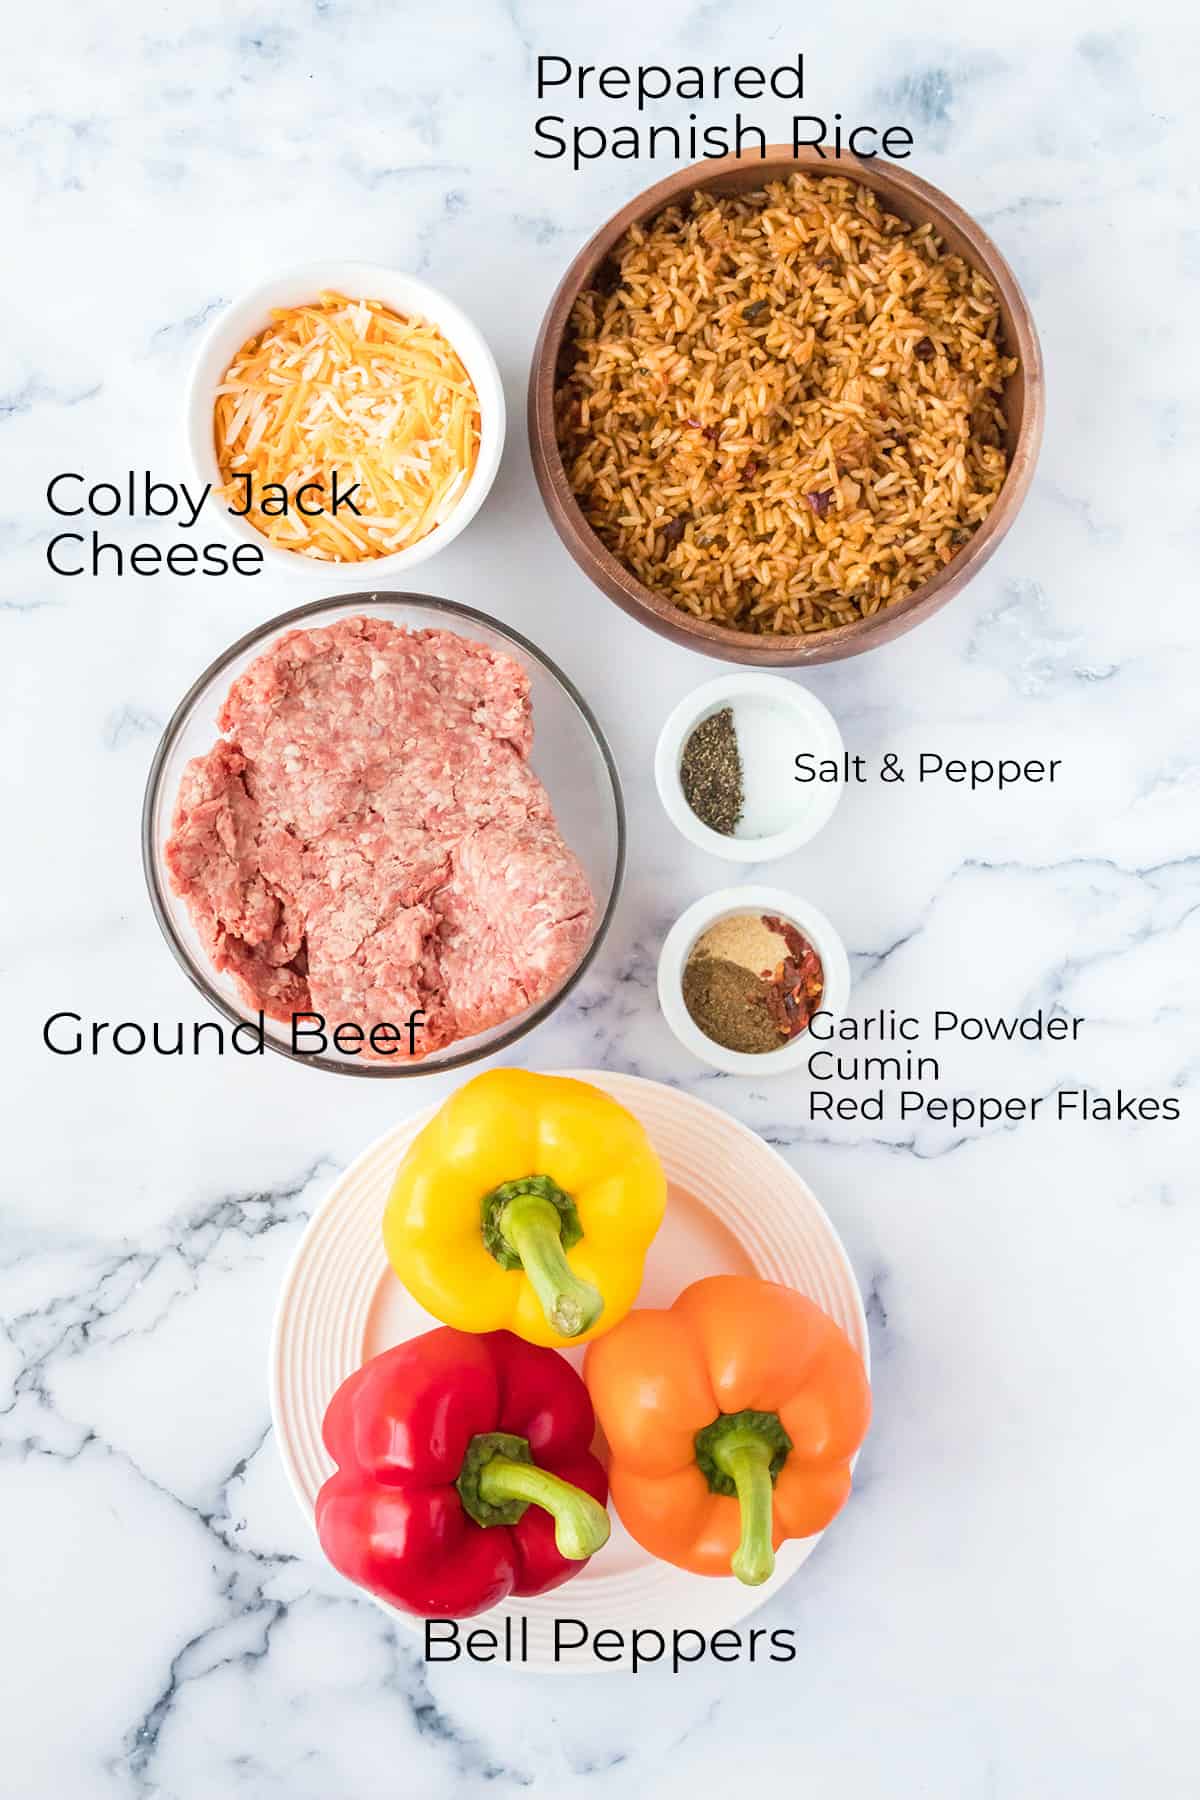 All ingredients needed to make stuffed bell peppers.